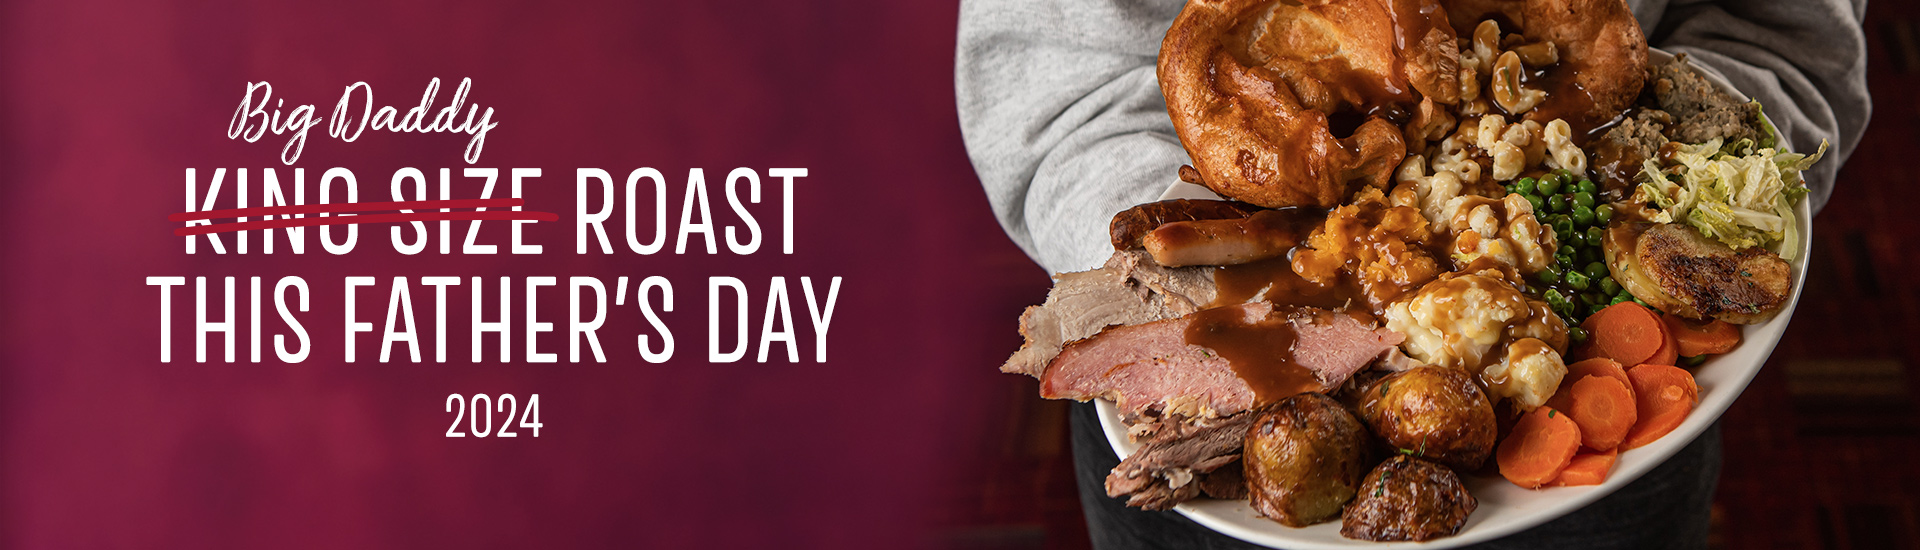 Father’s day carvery in Walsall, Father’s day at Toby Carvery Walsall Broadway